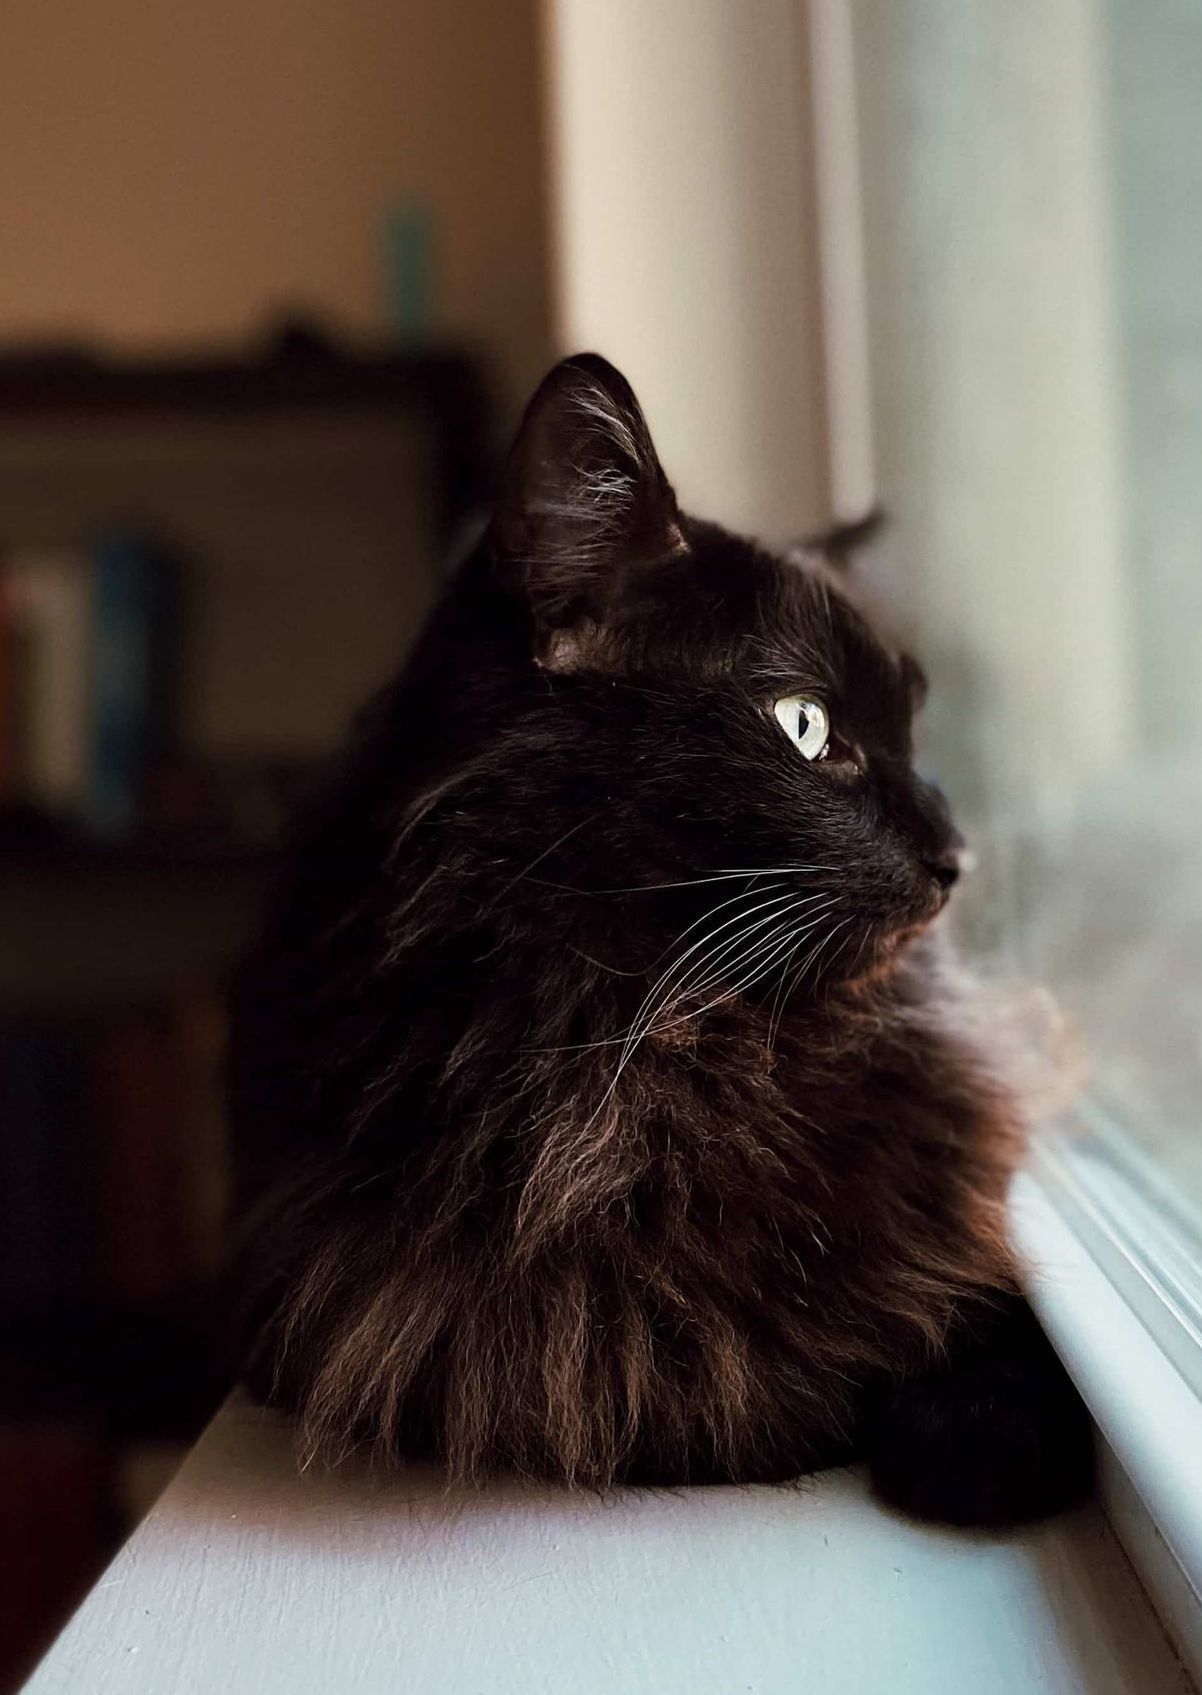 a black cat is sitting on a window sill looking out the window .